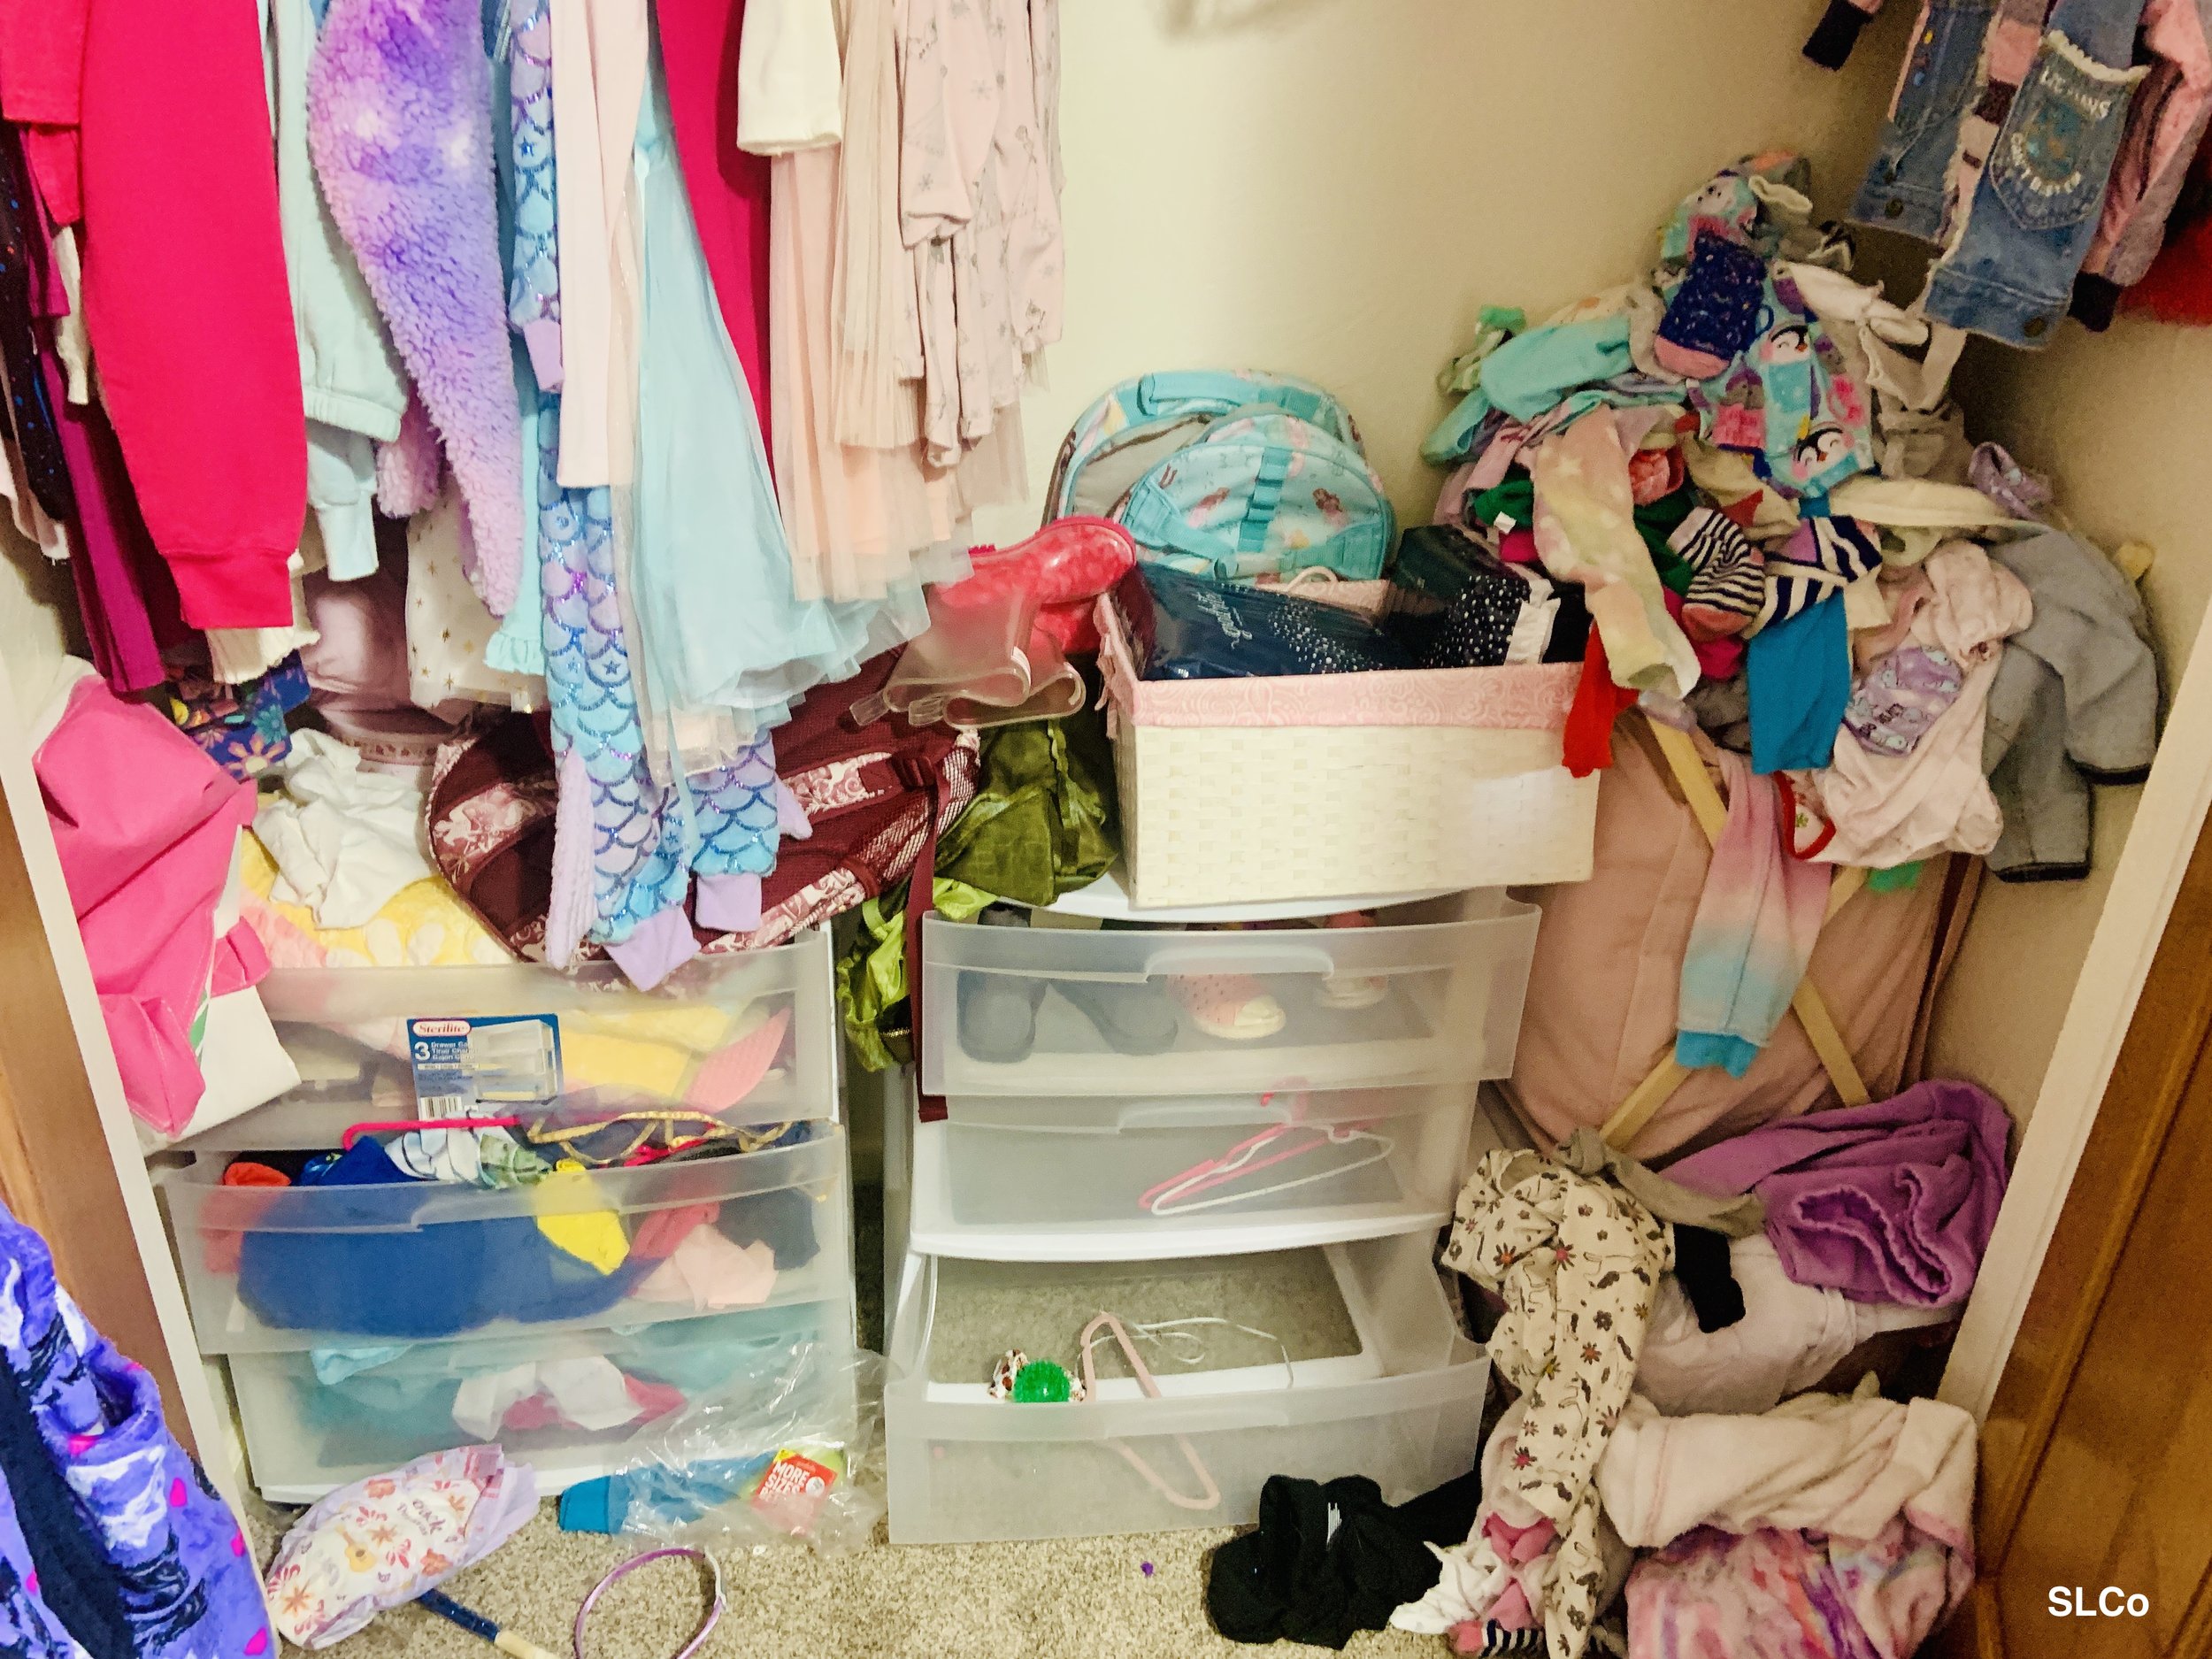 Bottom of little girls closet with white and clear drawered three bin storage containers with hangers and clothes thrown in them.